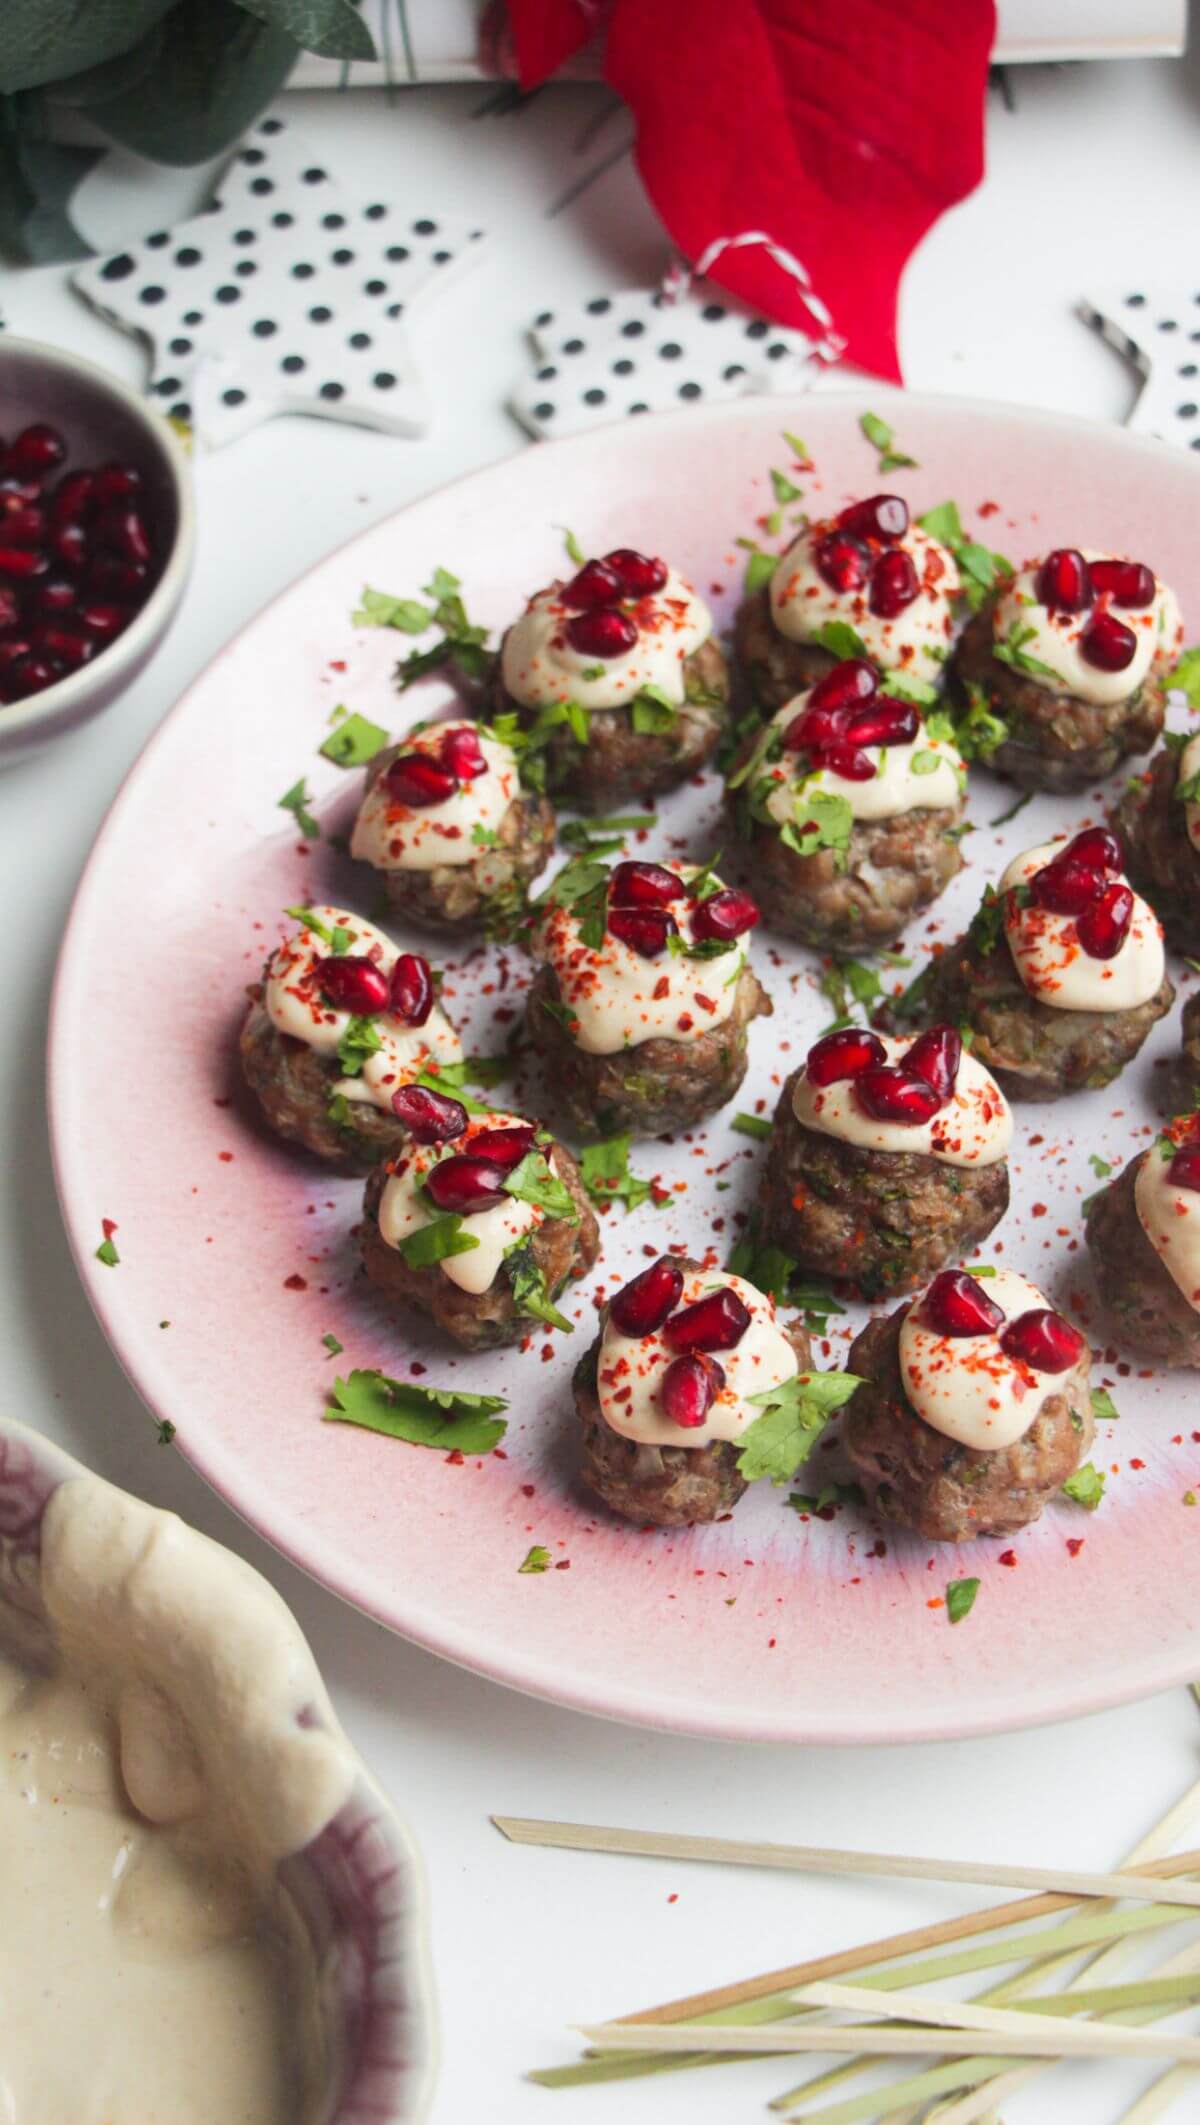 Decorated lamb meatballs on a small pink plate.